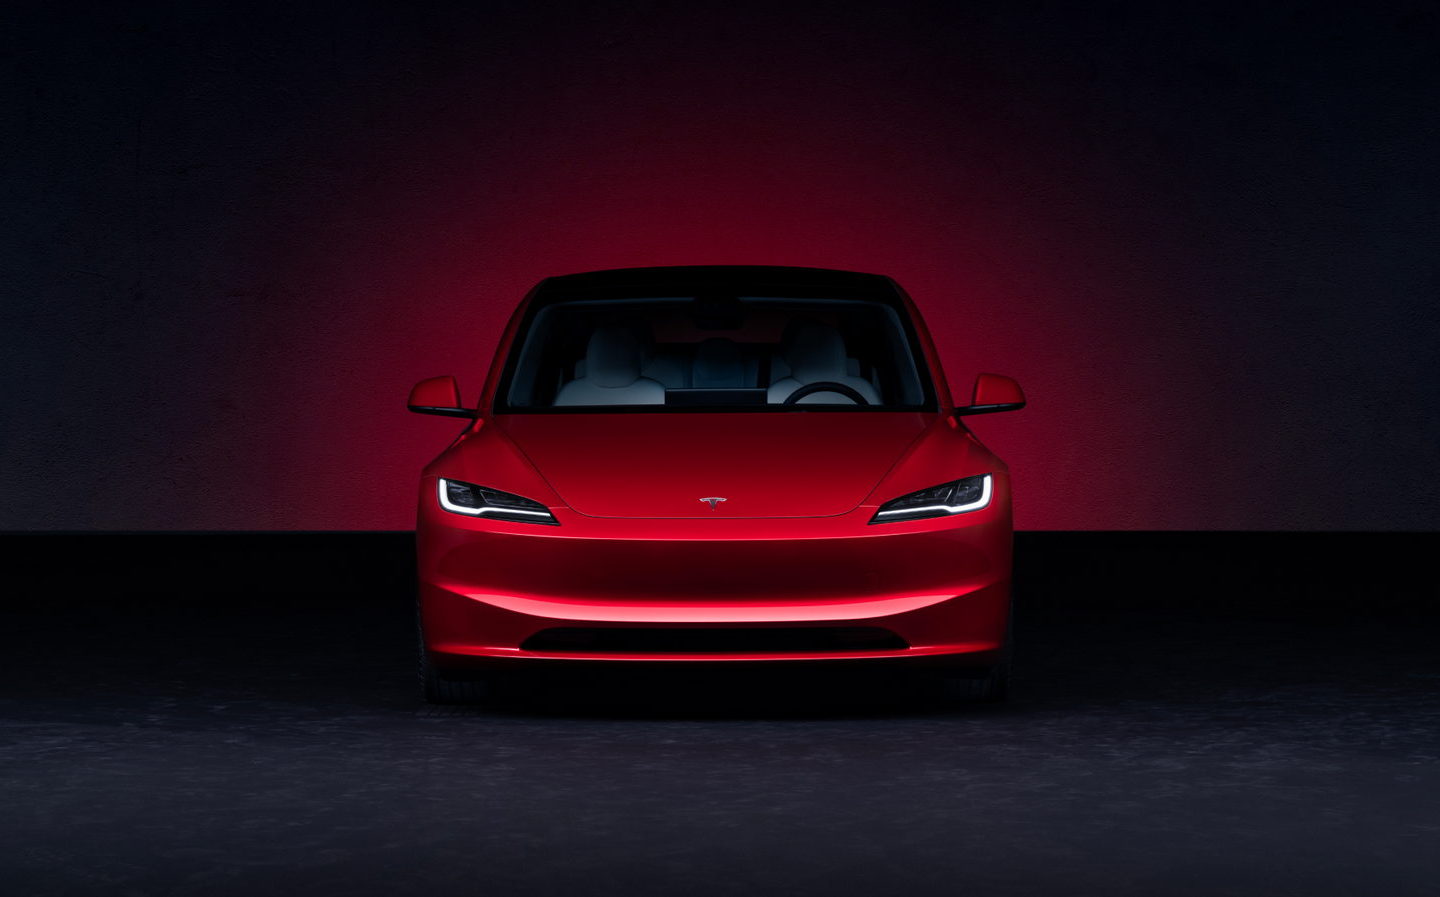 electric car, model 3, tesla, new tesla model 3 goes further on a charge, gets higher-quality cabin and new technology